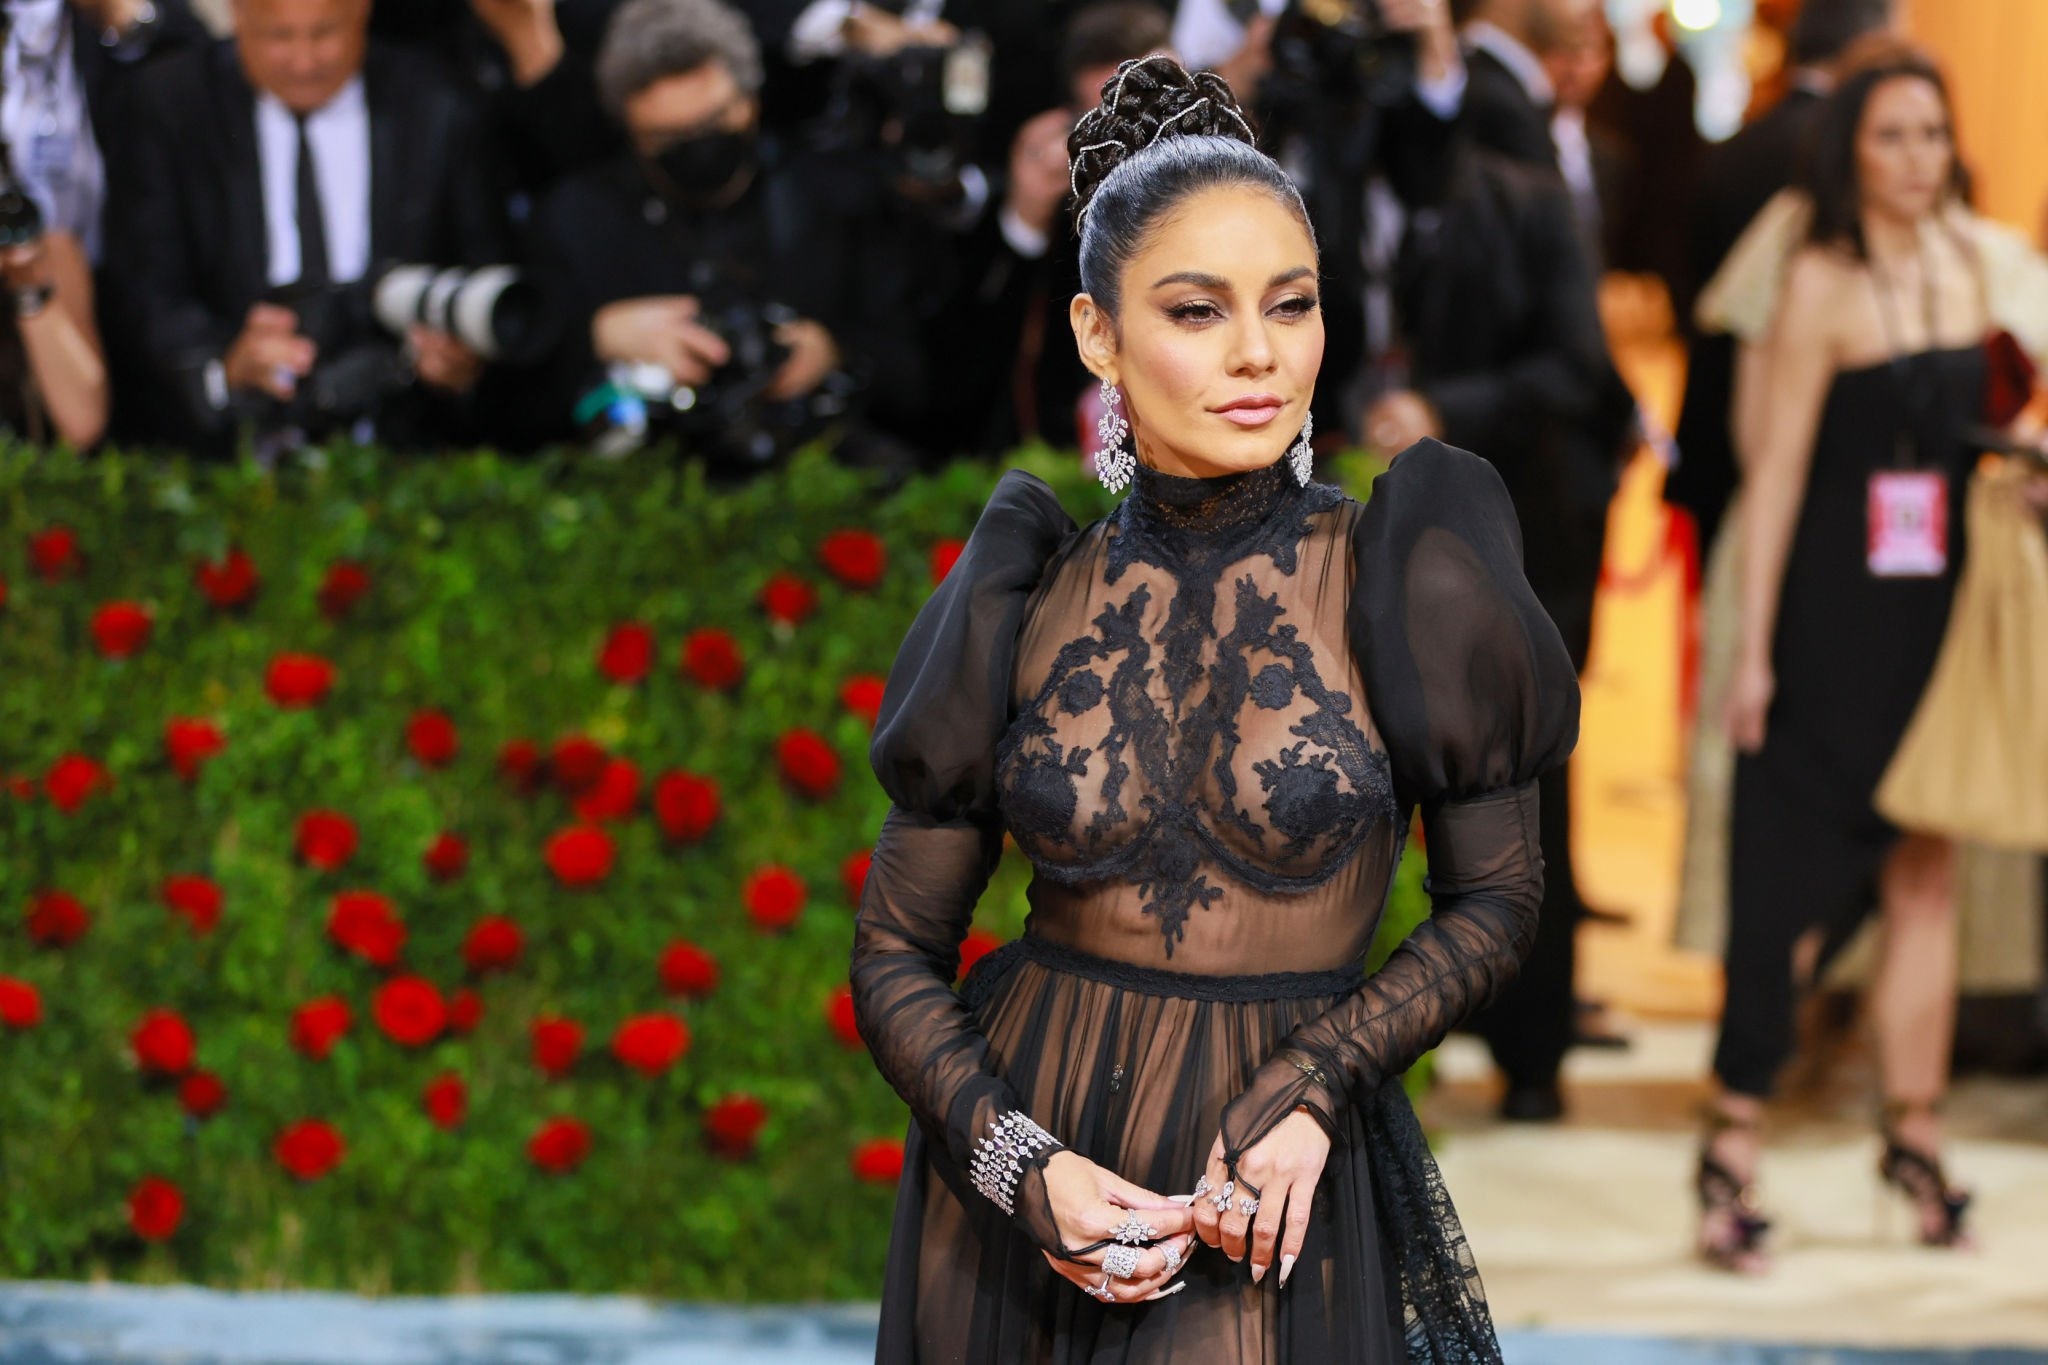 Vanessa Hudgens - 2022 Met Gala "In America: An Anthology of Fashion" in New York May 2, 2022